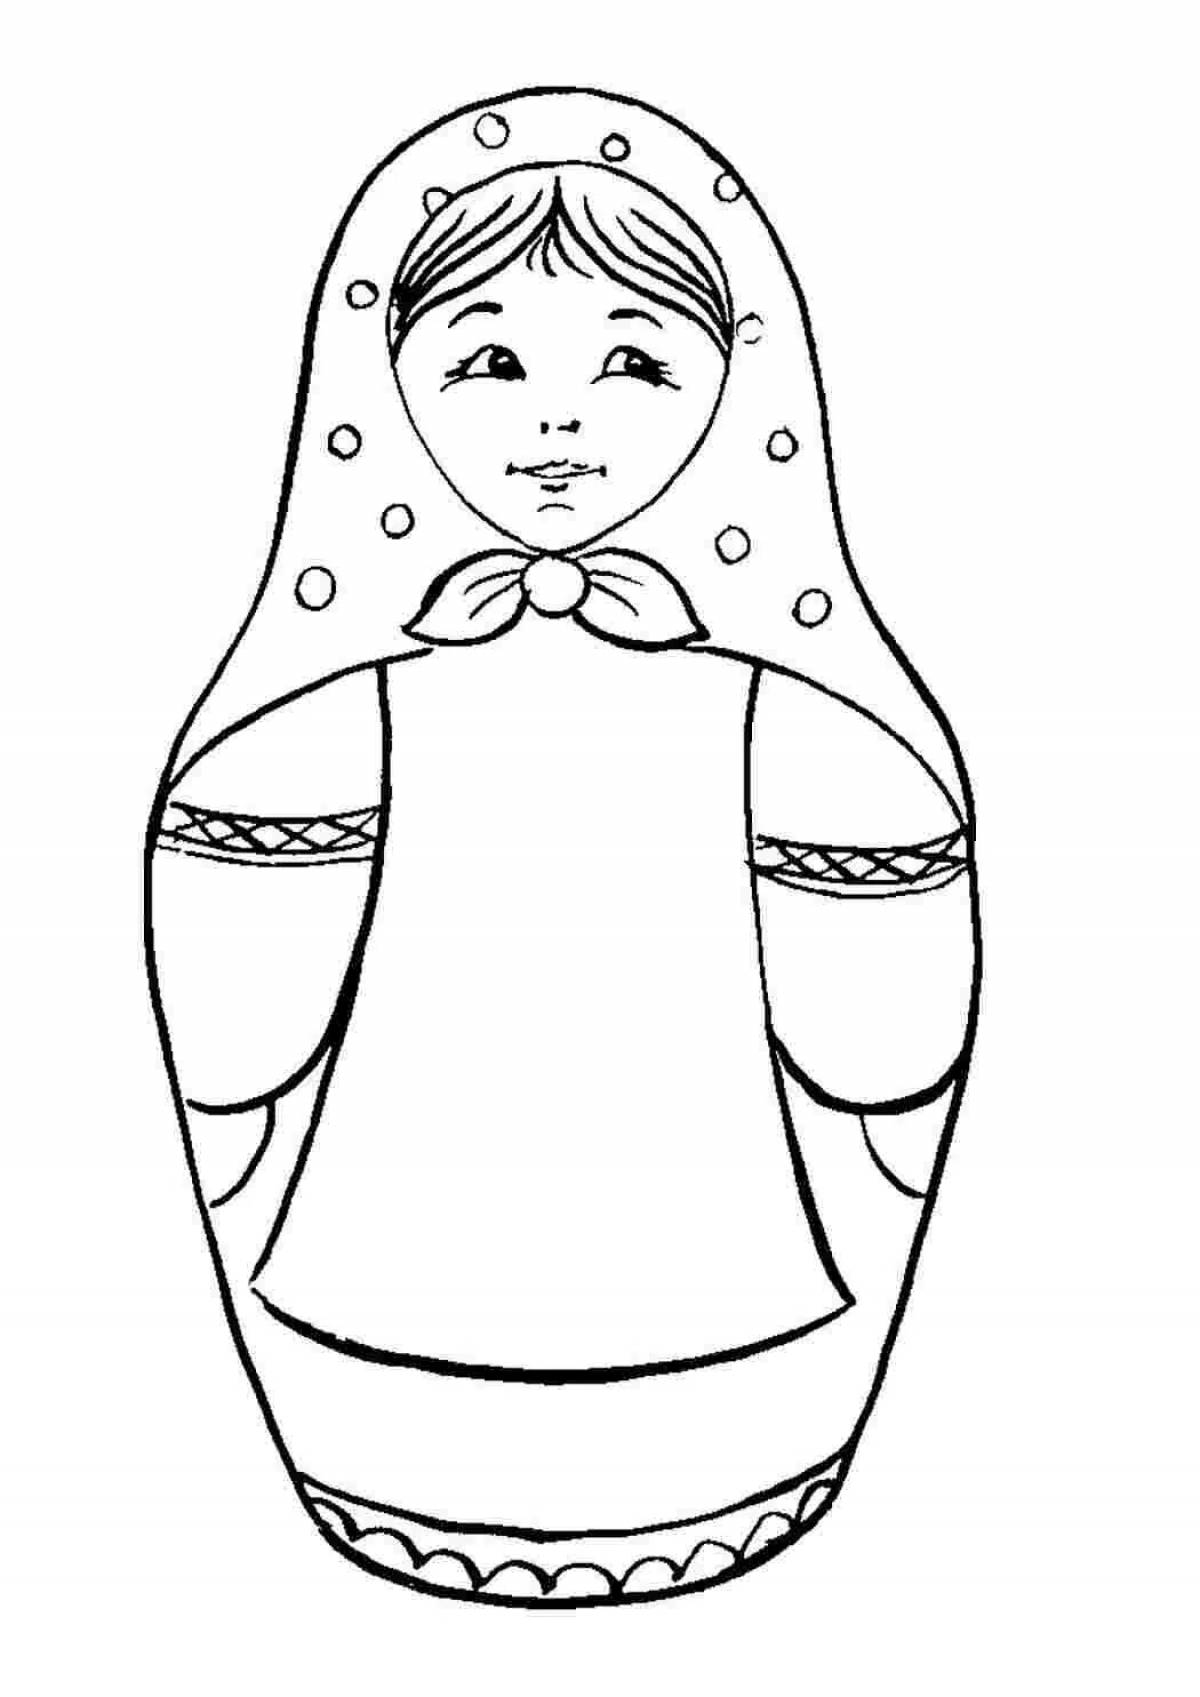 Intriguing nesting doll drawing